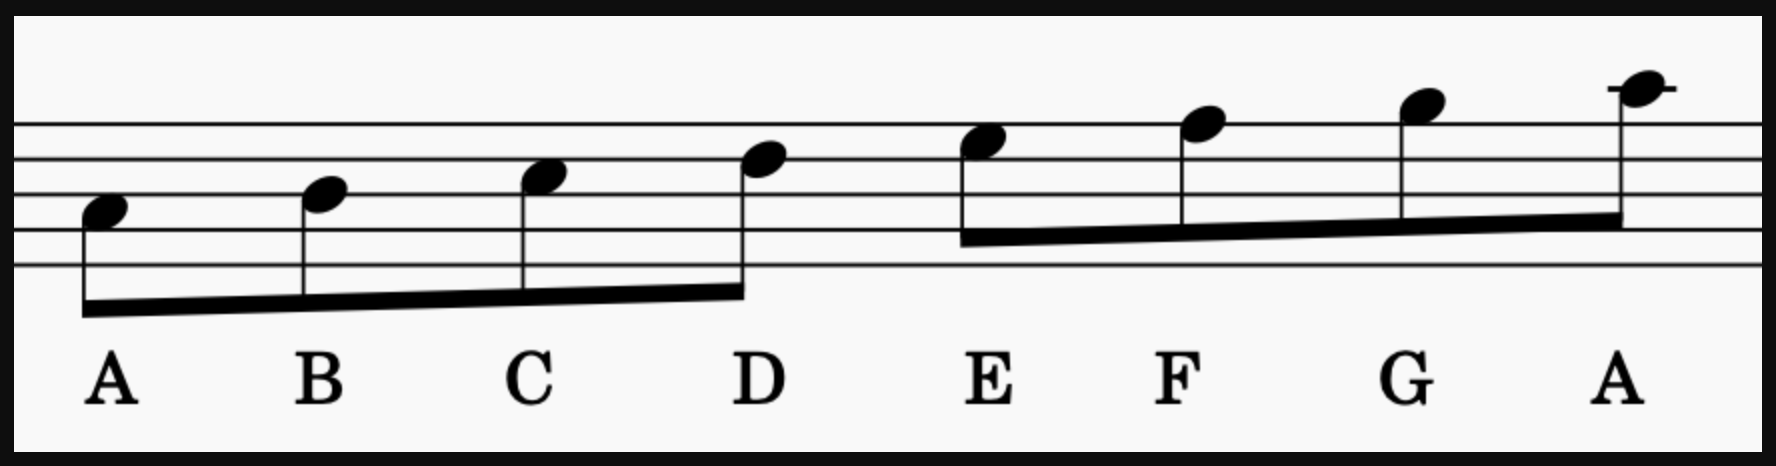 Modes: A Aeolian Scale; A Natural Minor scale; or C major starting on A